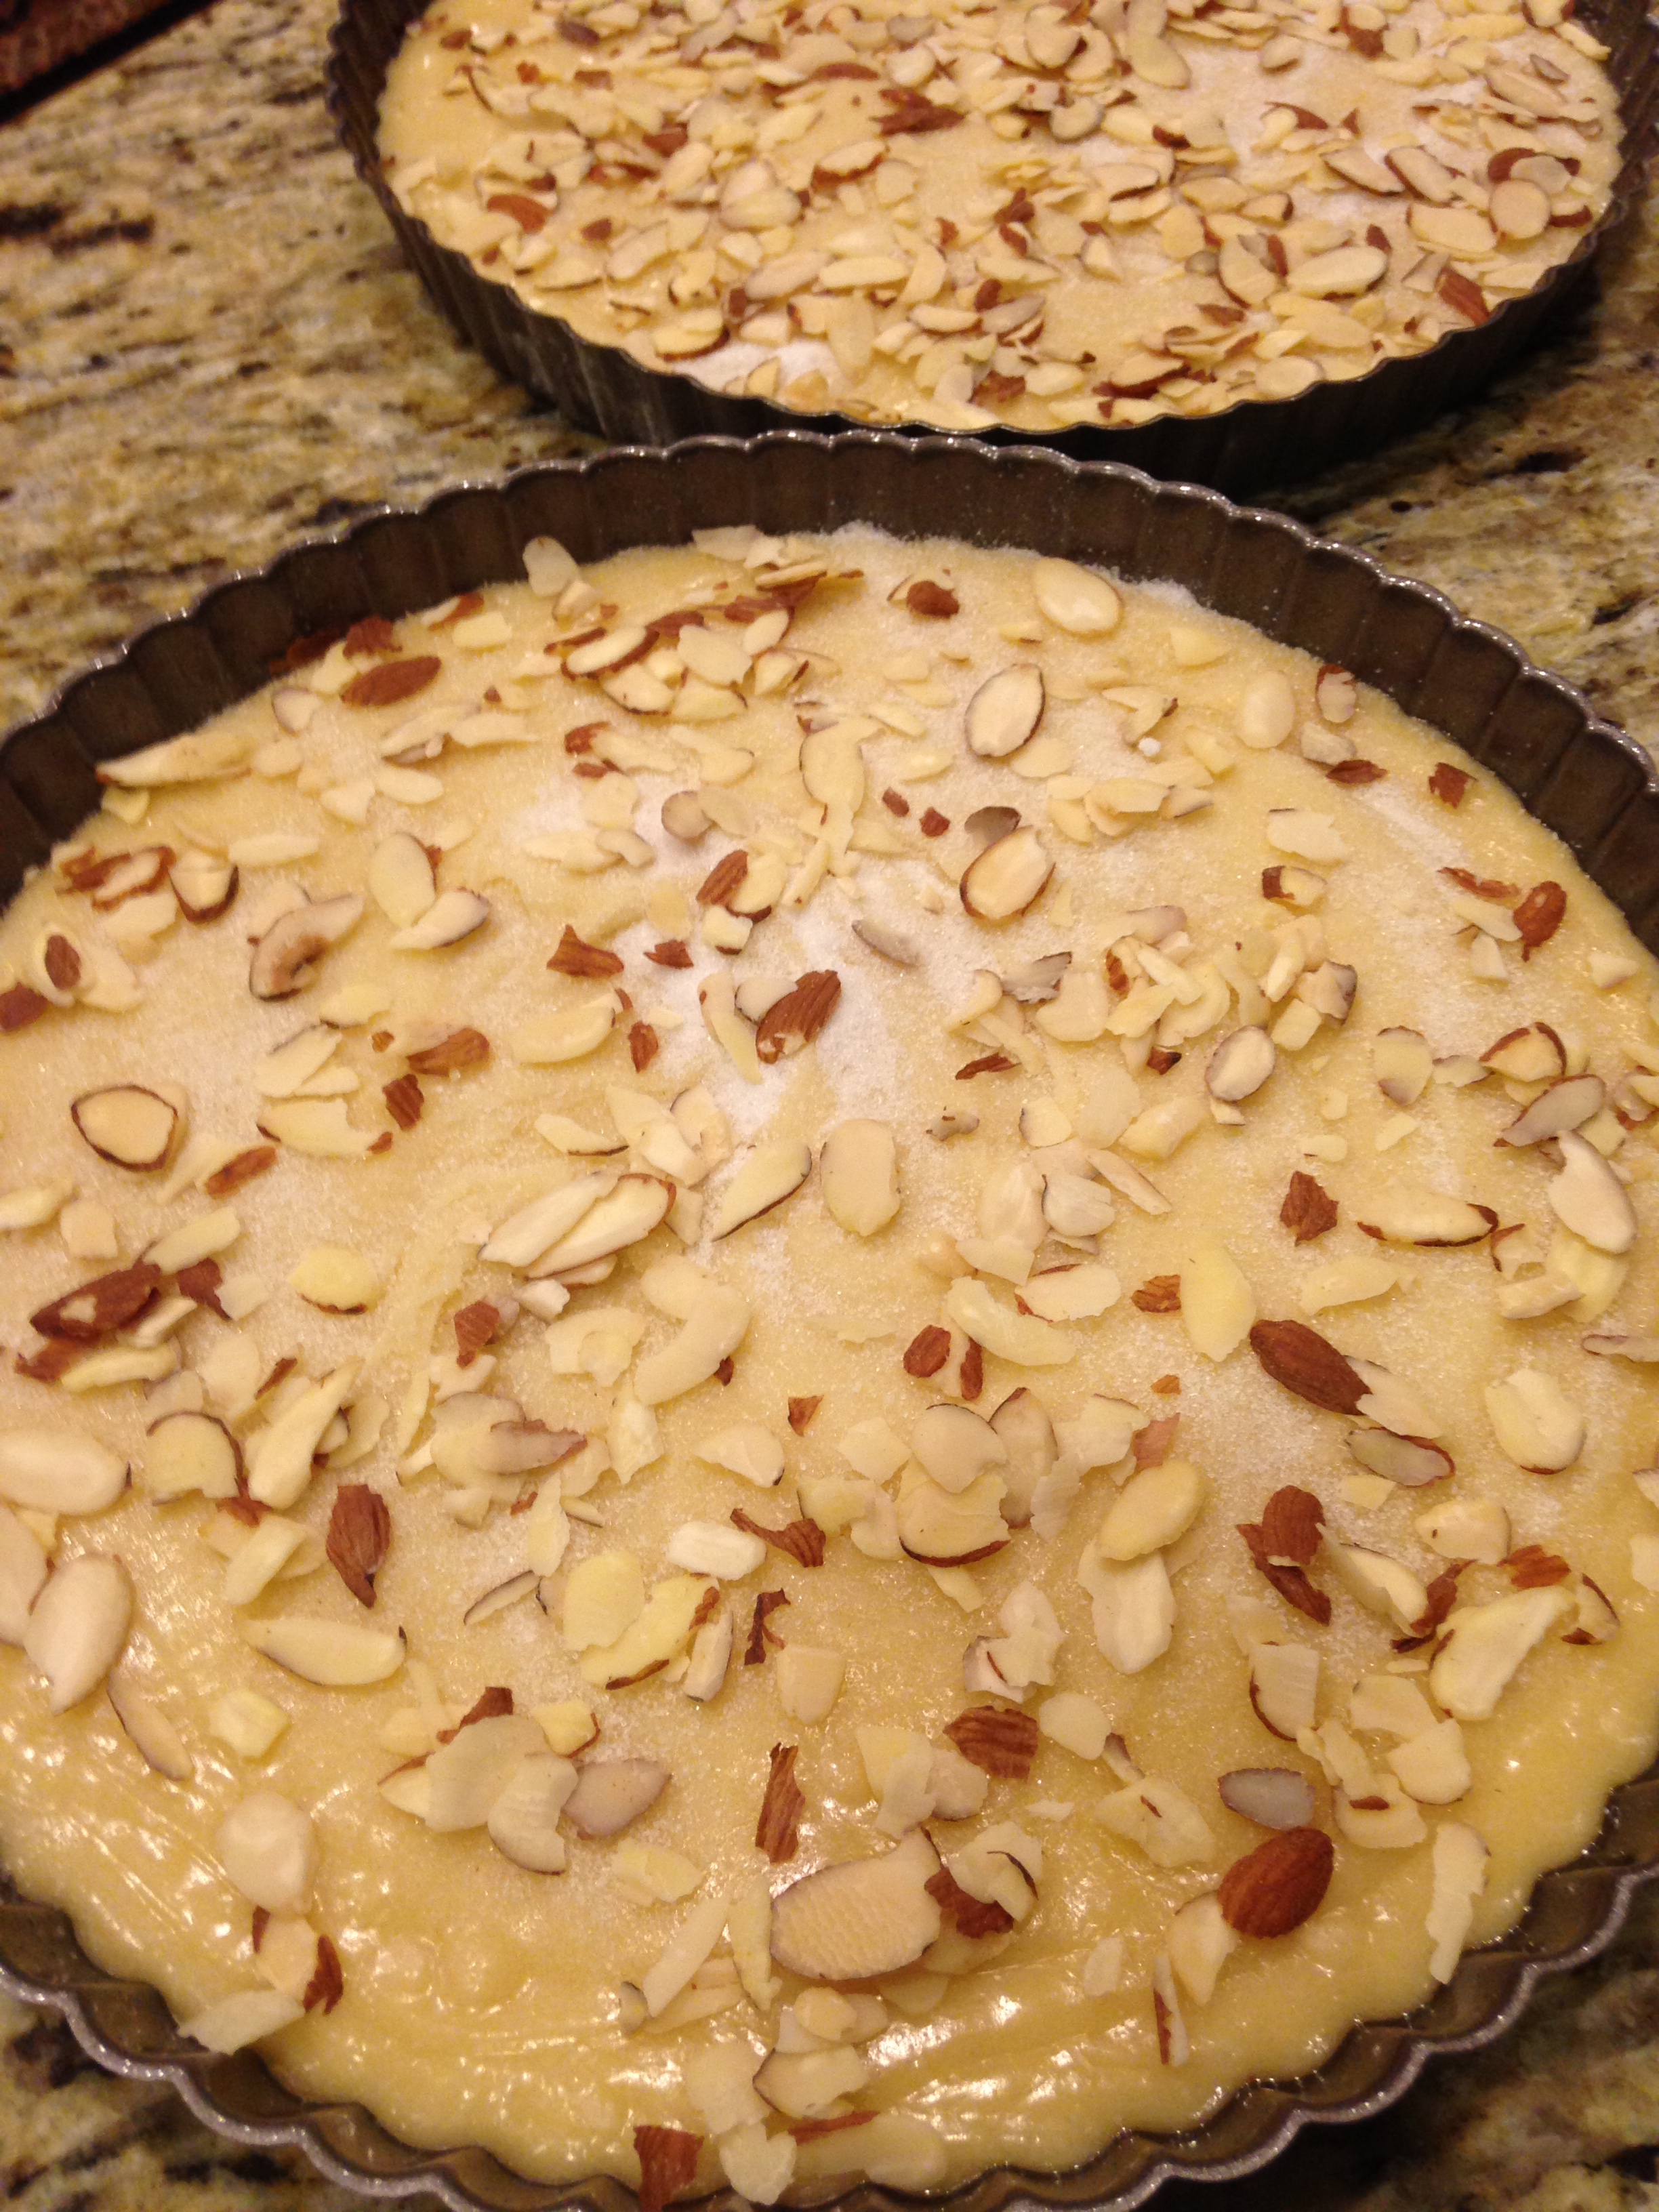 Ready for oven all sprinkled with sugar and almonds